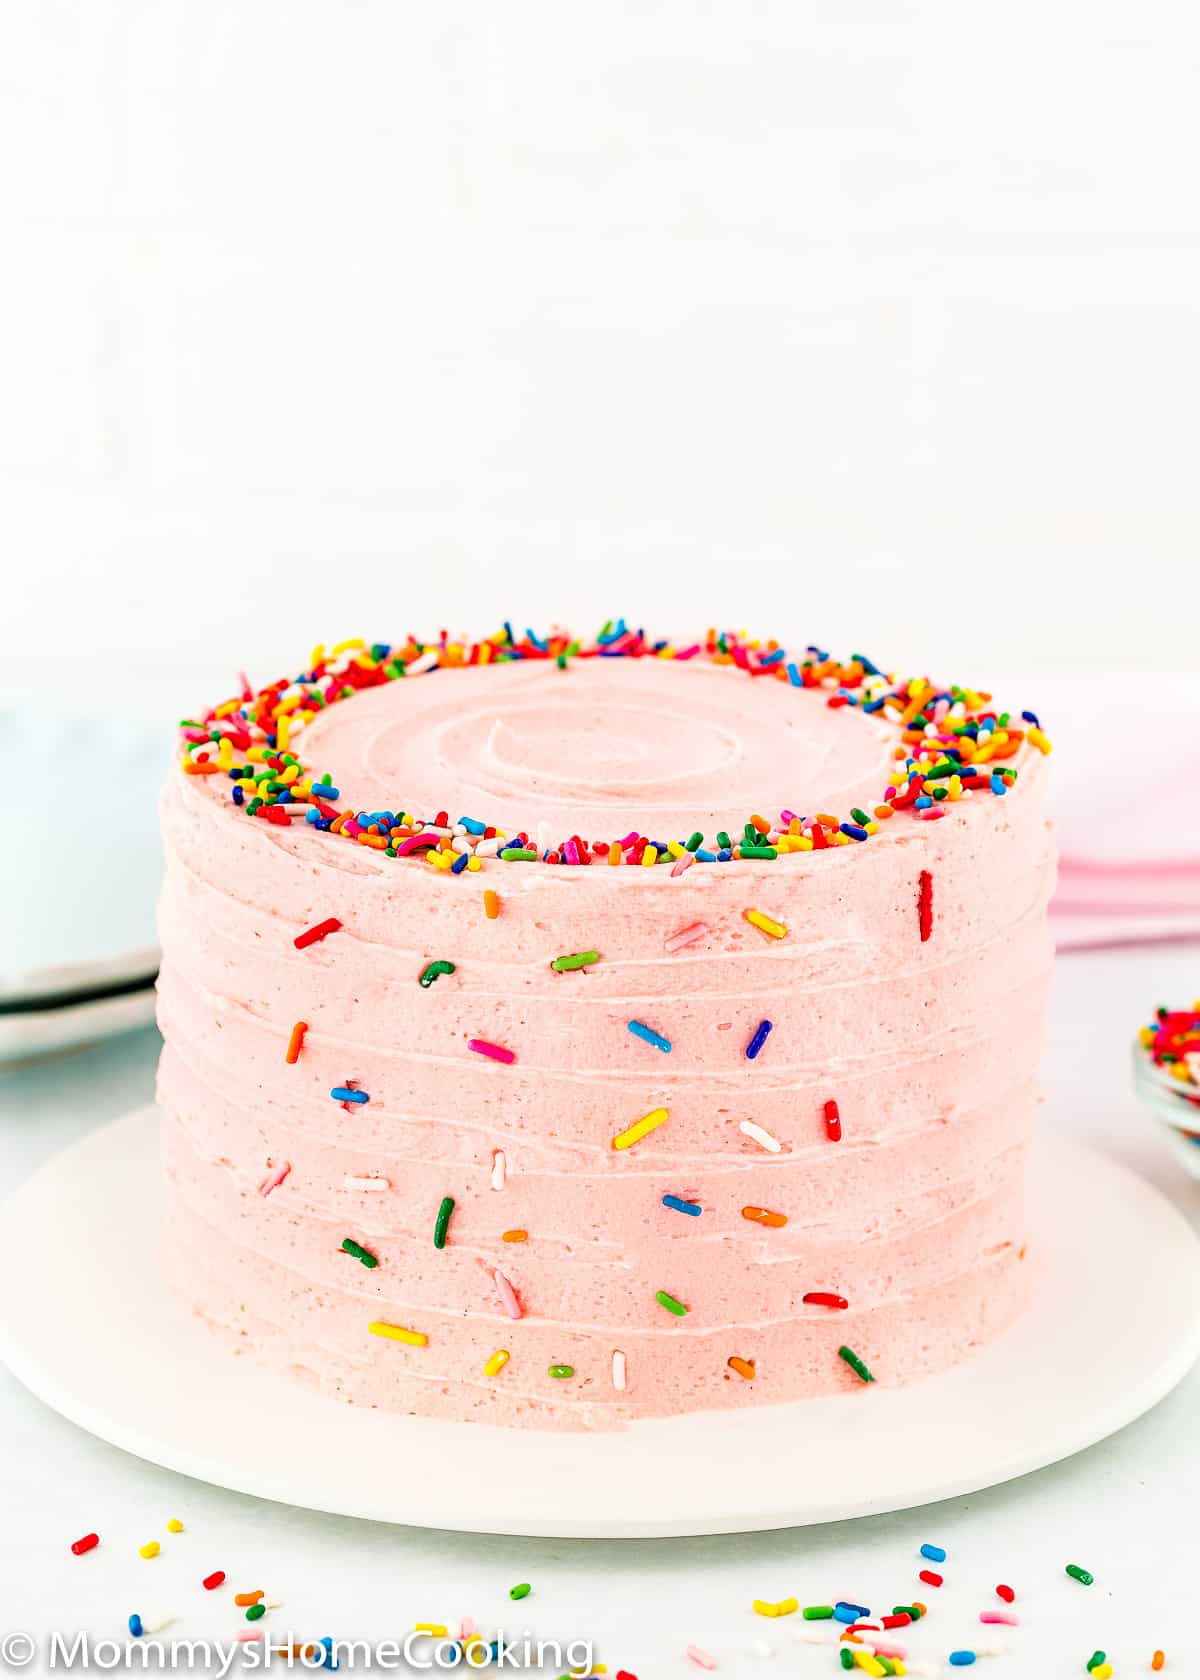 whole egg-free confetti cake with pink buttercream and sprinkles over a cake plate.